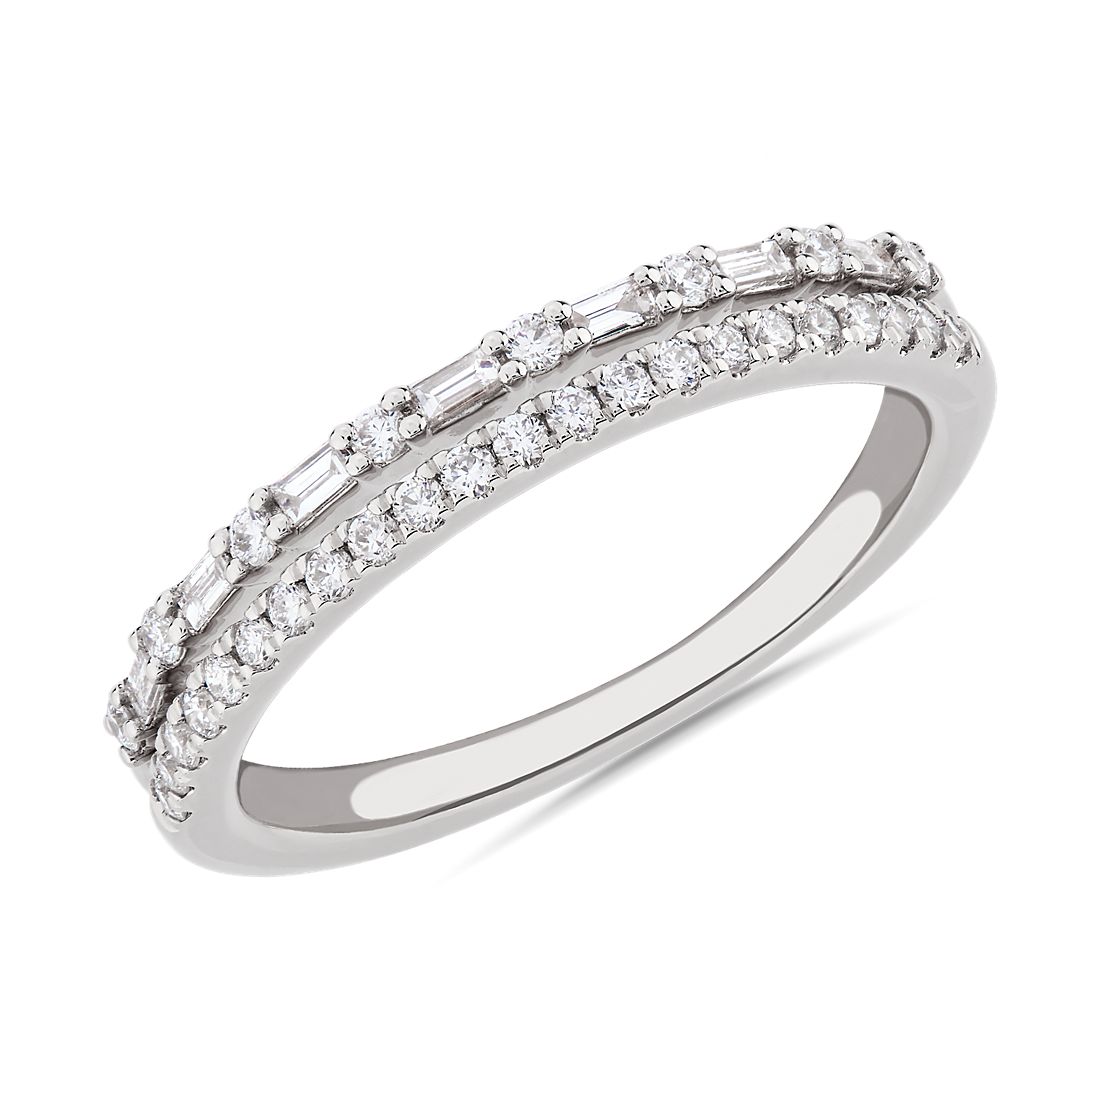 Two Row Baguette and Pavé Diamond Ring in 14k White Gold (1/4 ct. tw.)